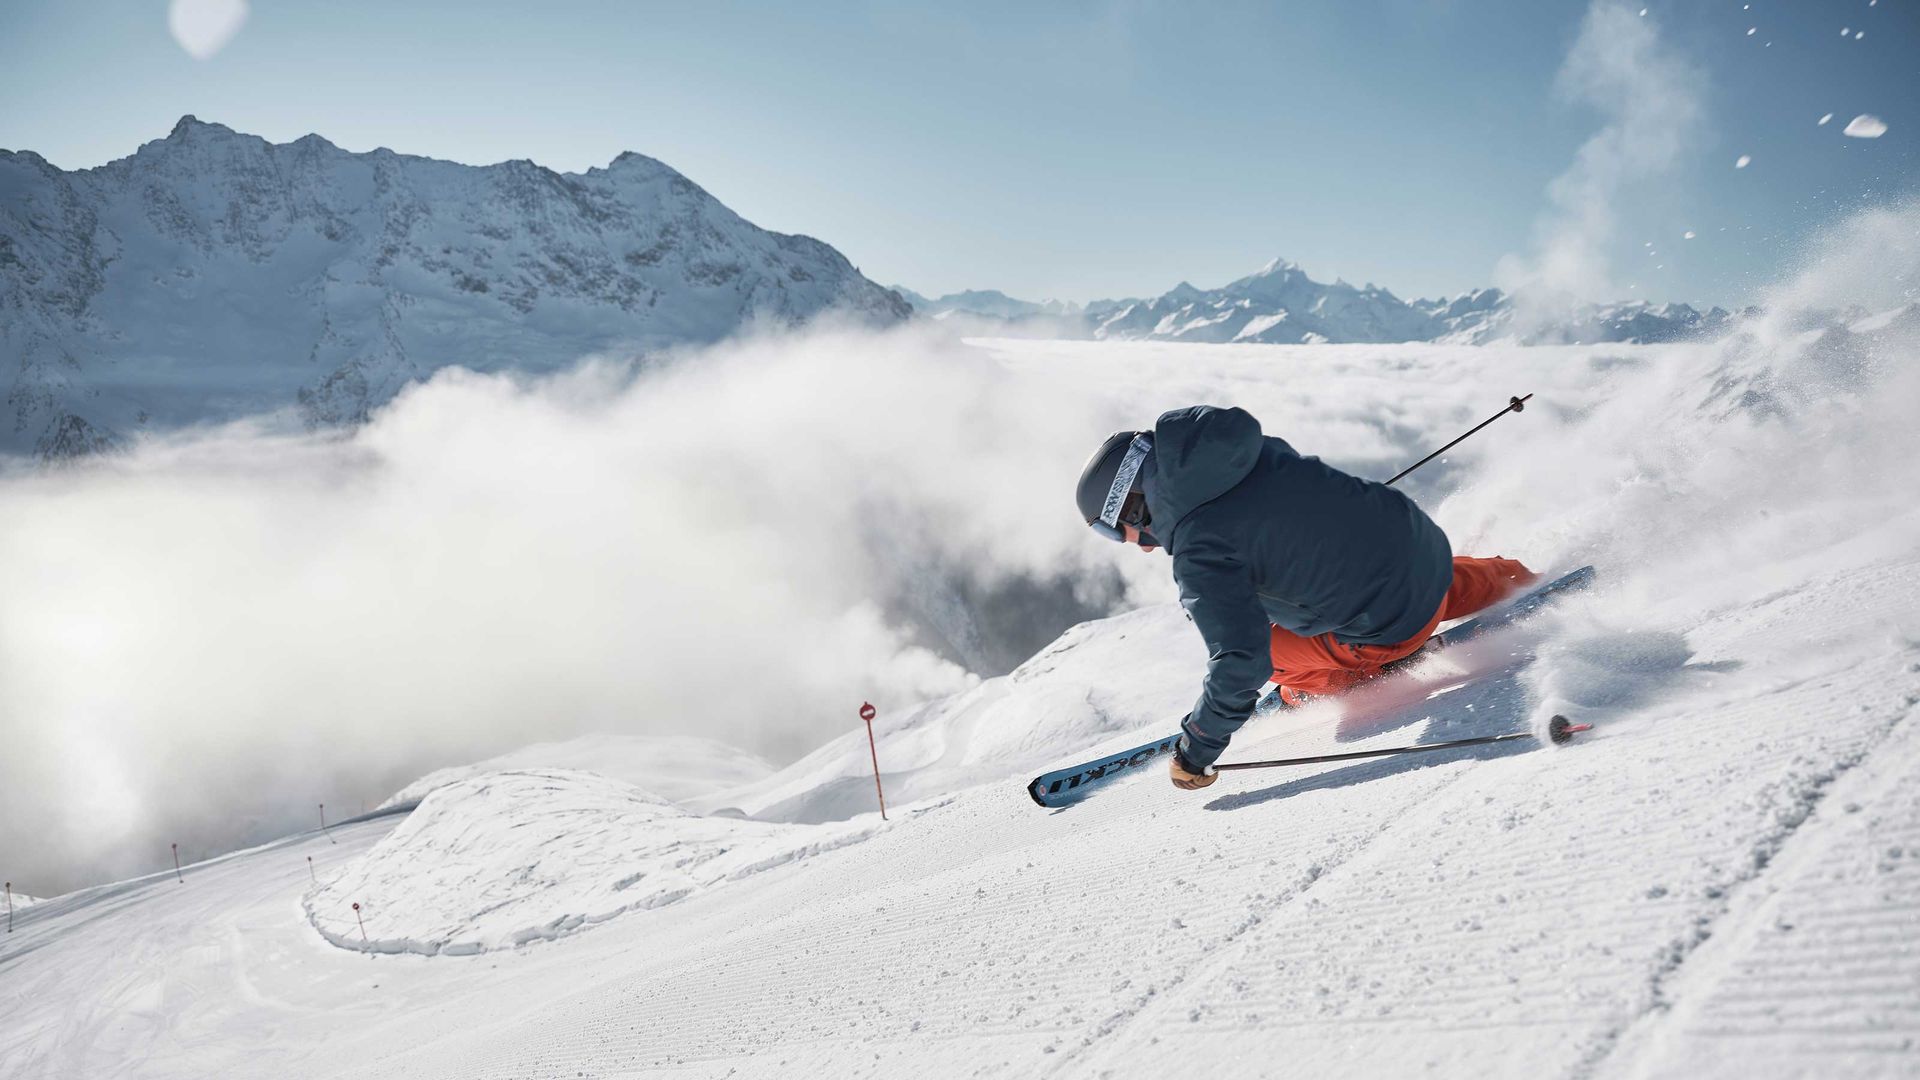 A skier going down a snow covered slope.